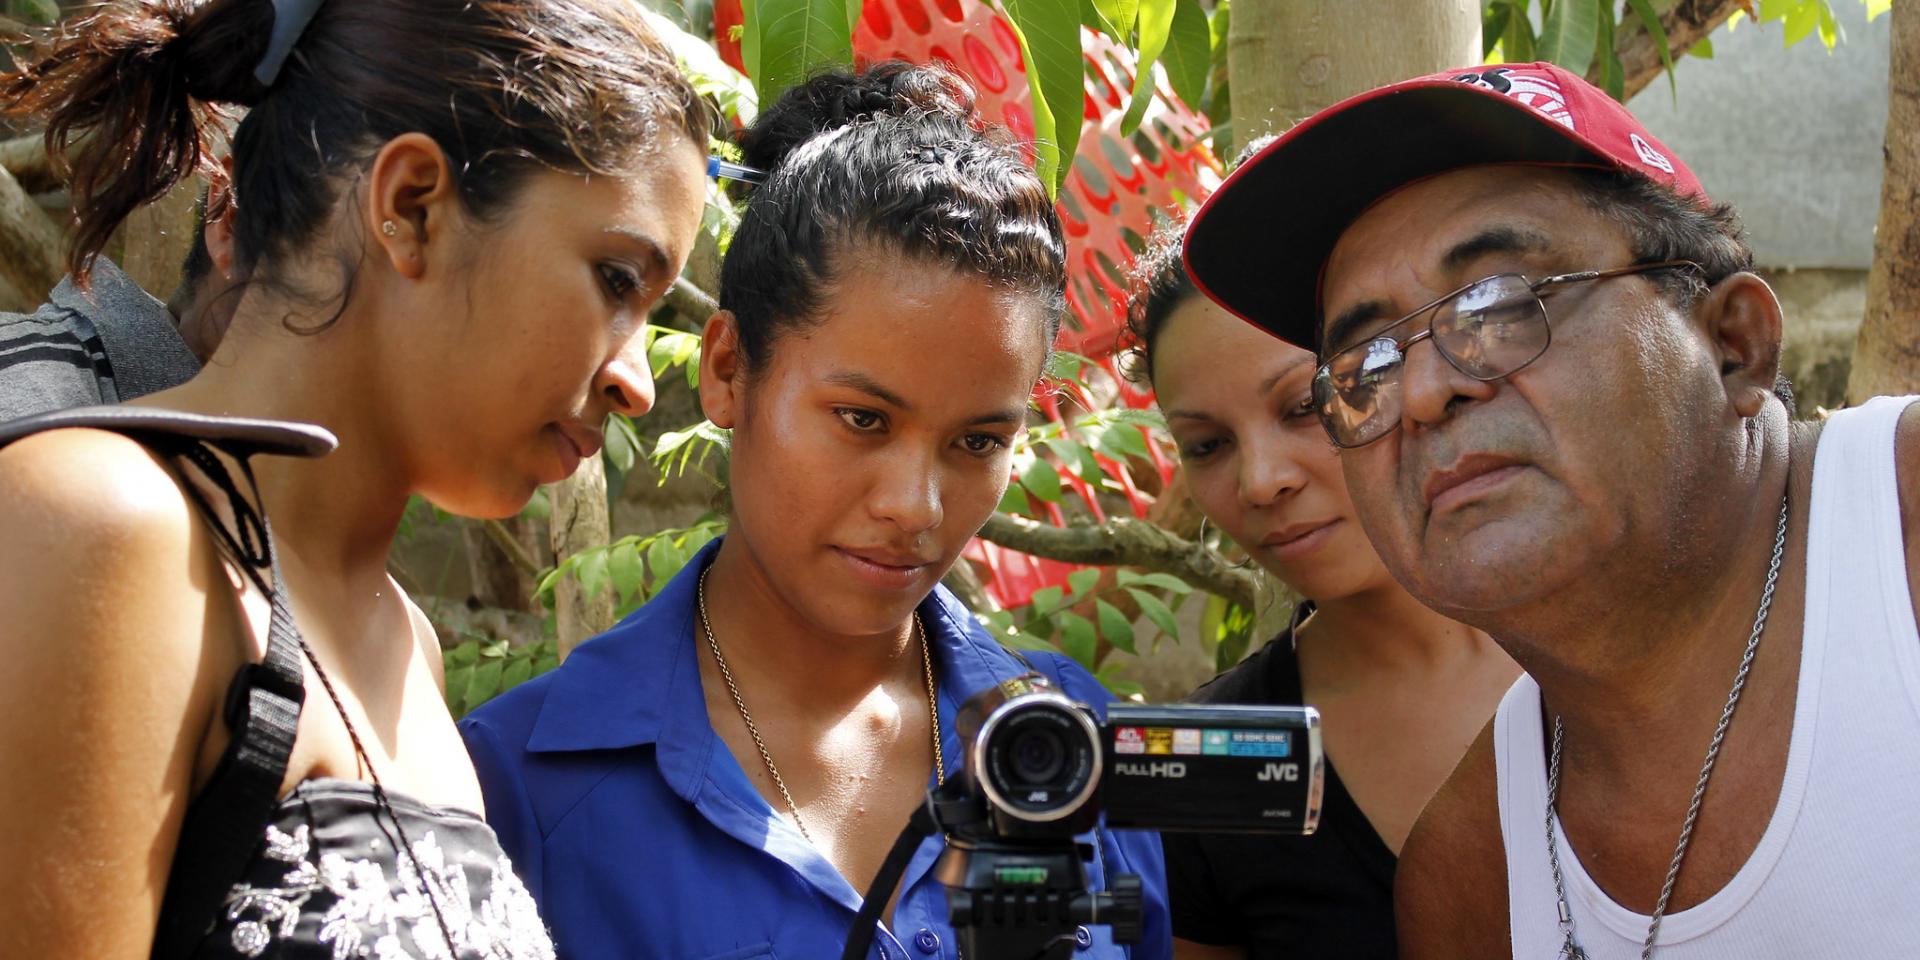 This photo is part of a Participatory Video workshop conducted in Somotillo, Chinandega, Nicaragua. Photo: CIAT/GianBetancourt.